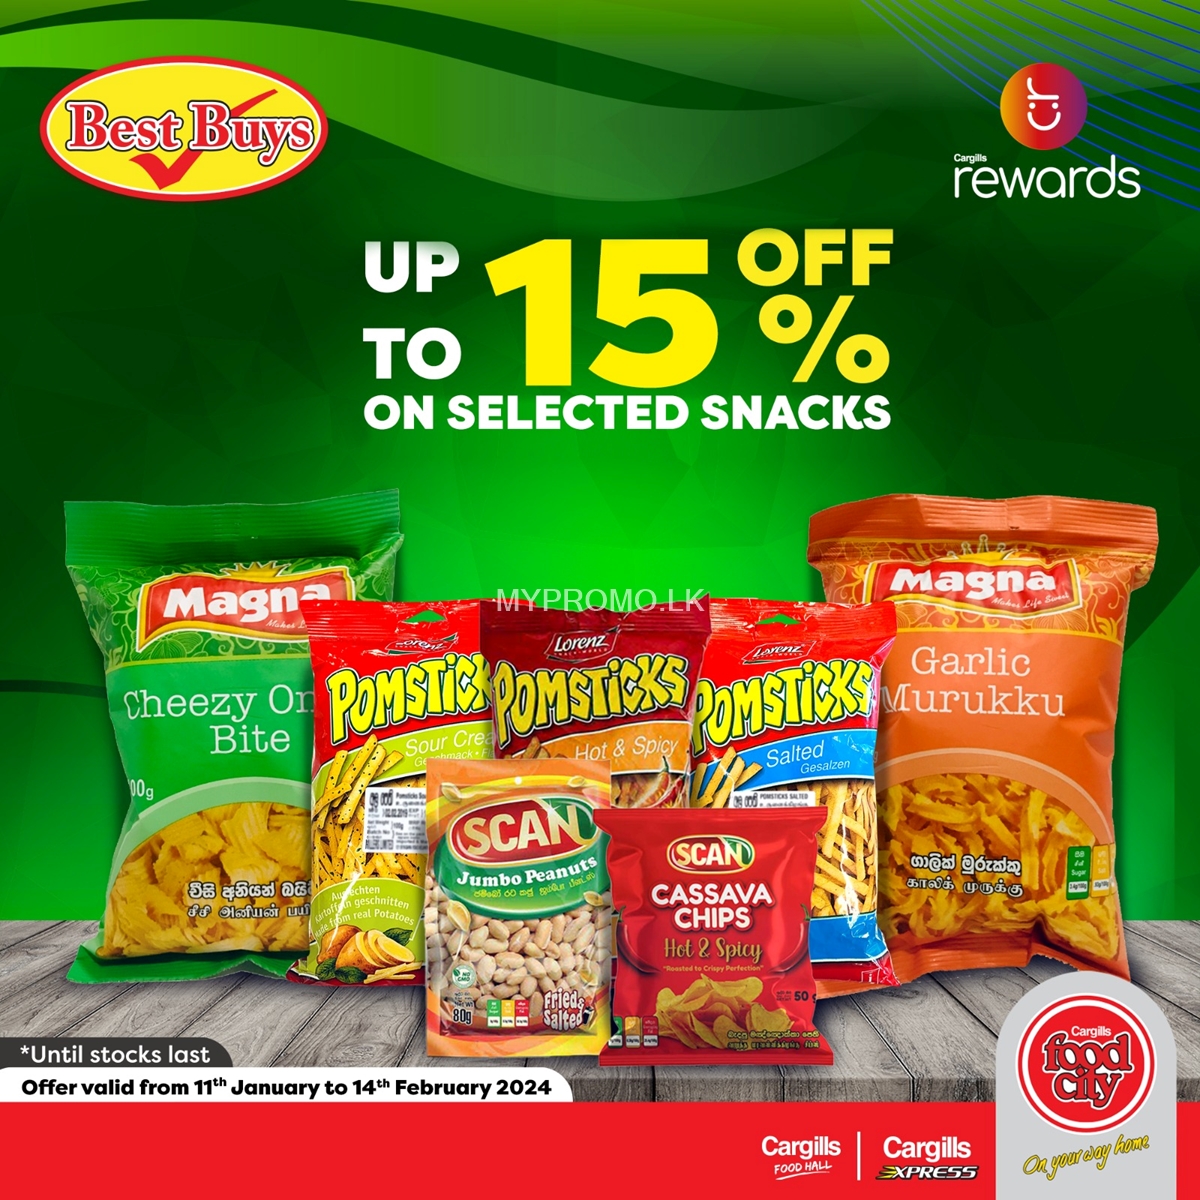 Up to 15% off on selected Snacks at Cargills Food City